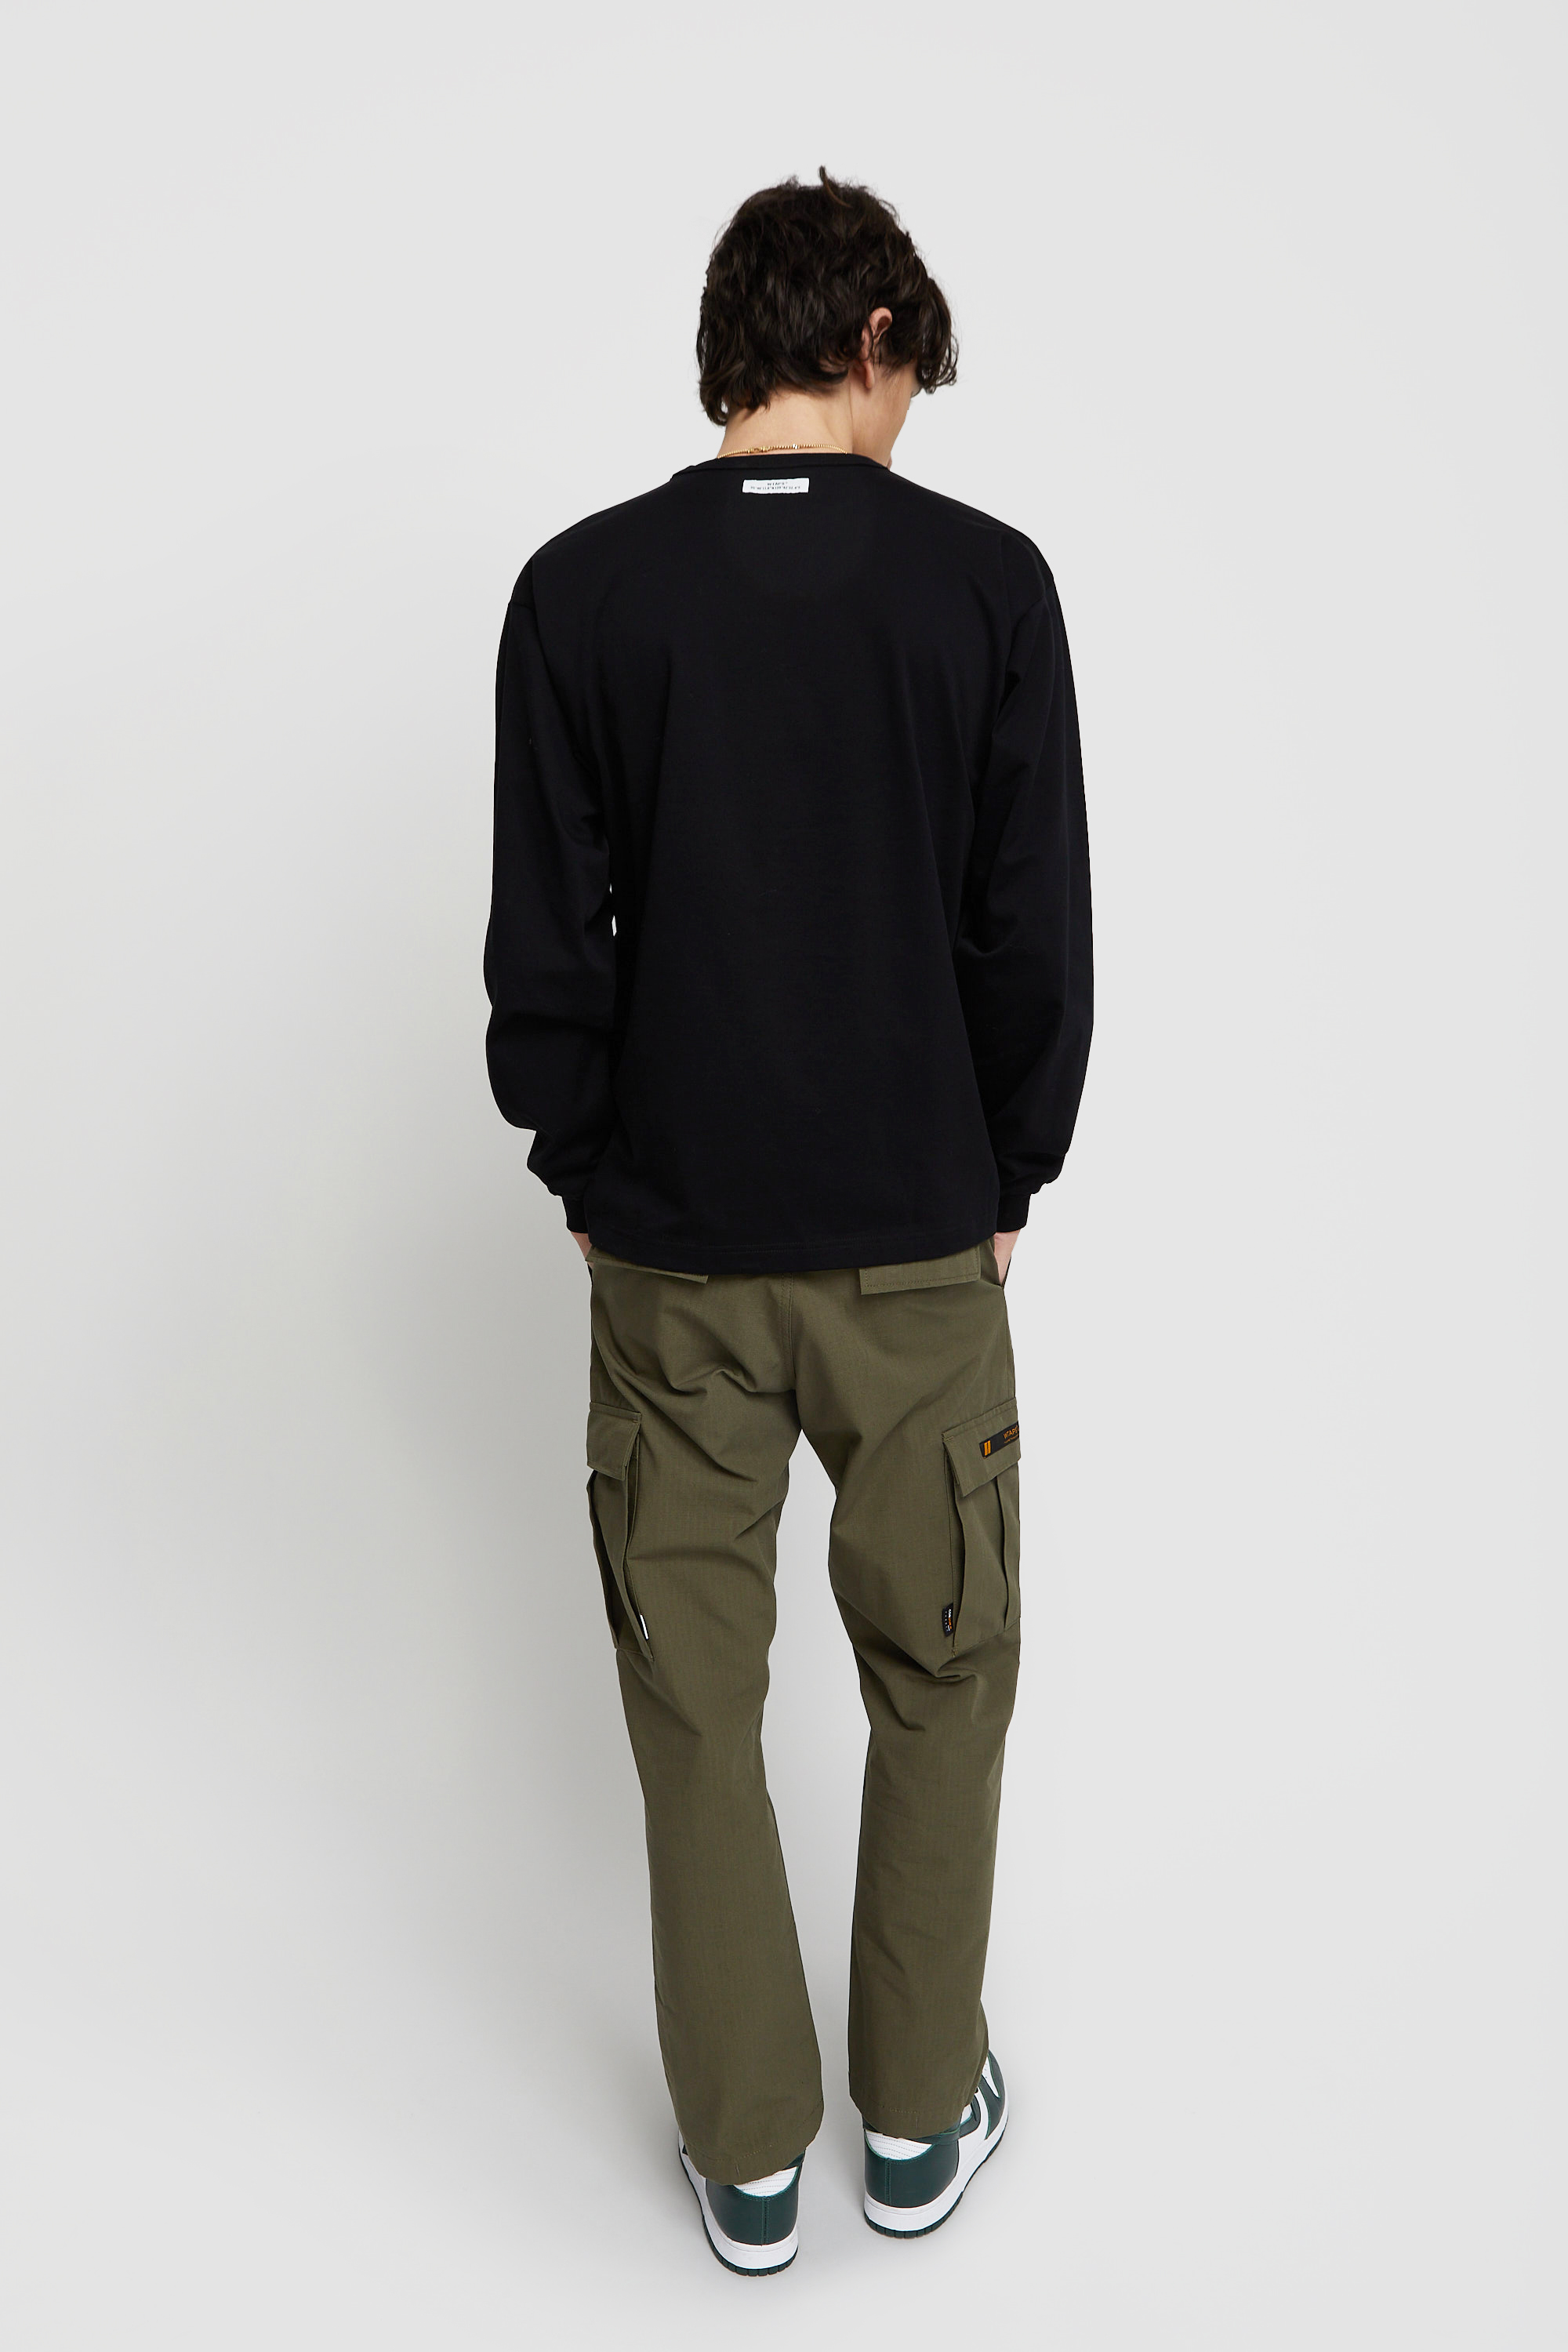 WTAPS JUNGLE STOCK TROUSERS NYCO RIPSTOP | www.myglobaltax.com